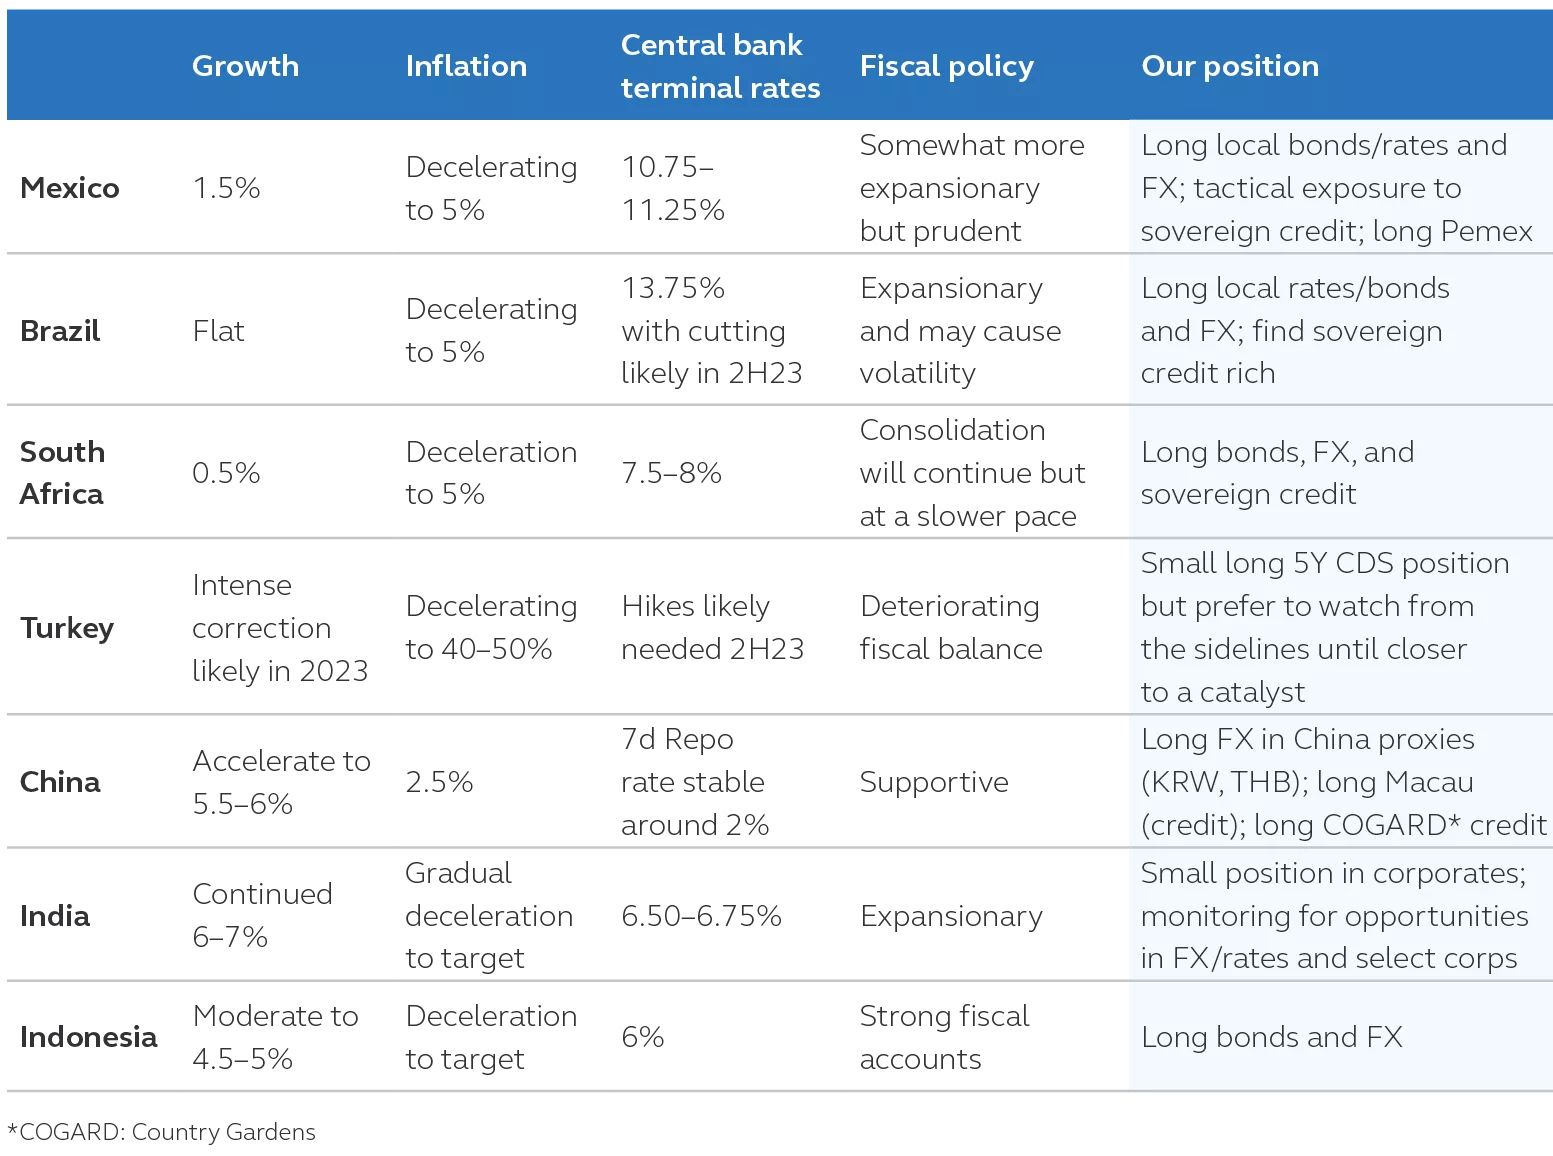 Table showing key country views in terms of growth, inflation, central bank terminal rates, fiscal policy, and the Principal position 